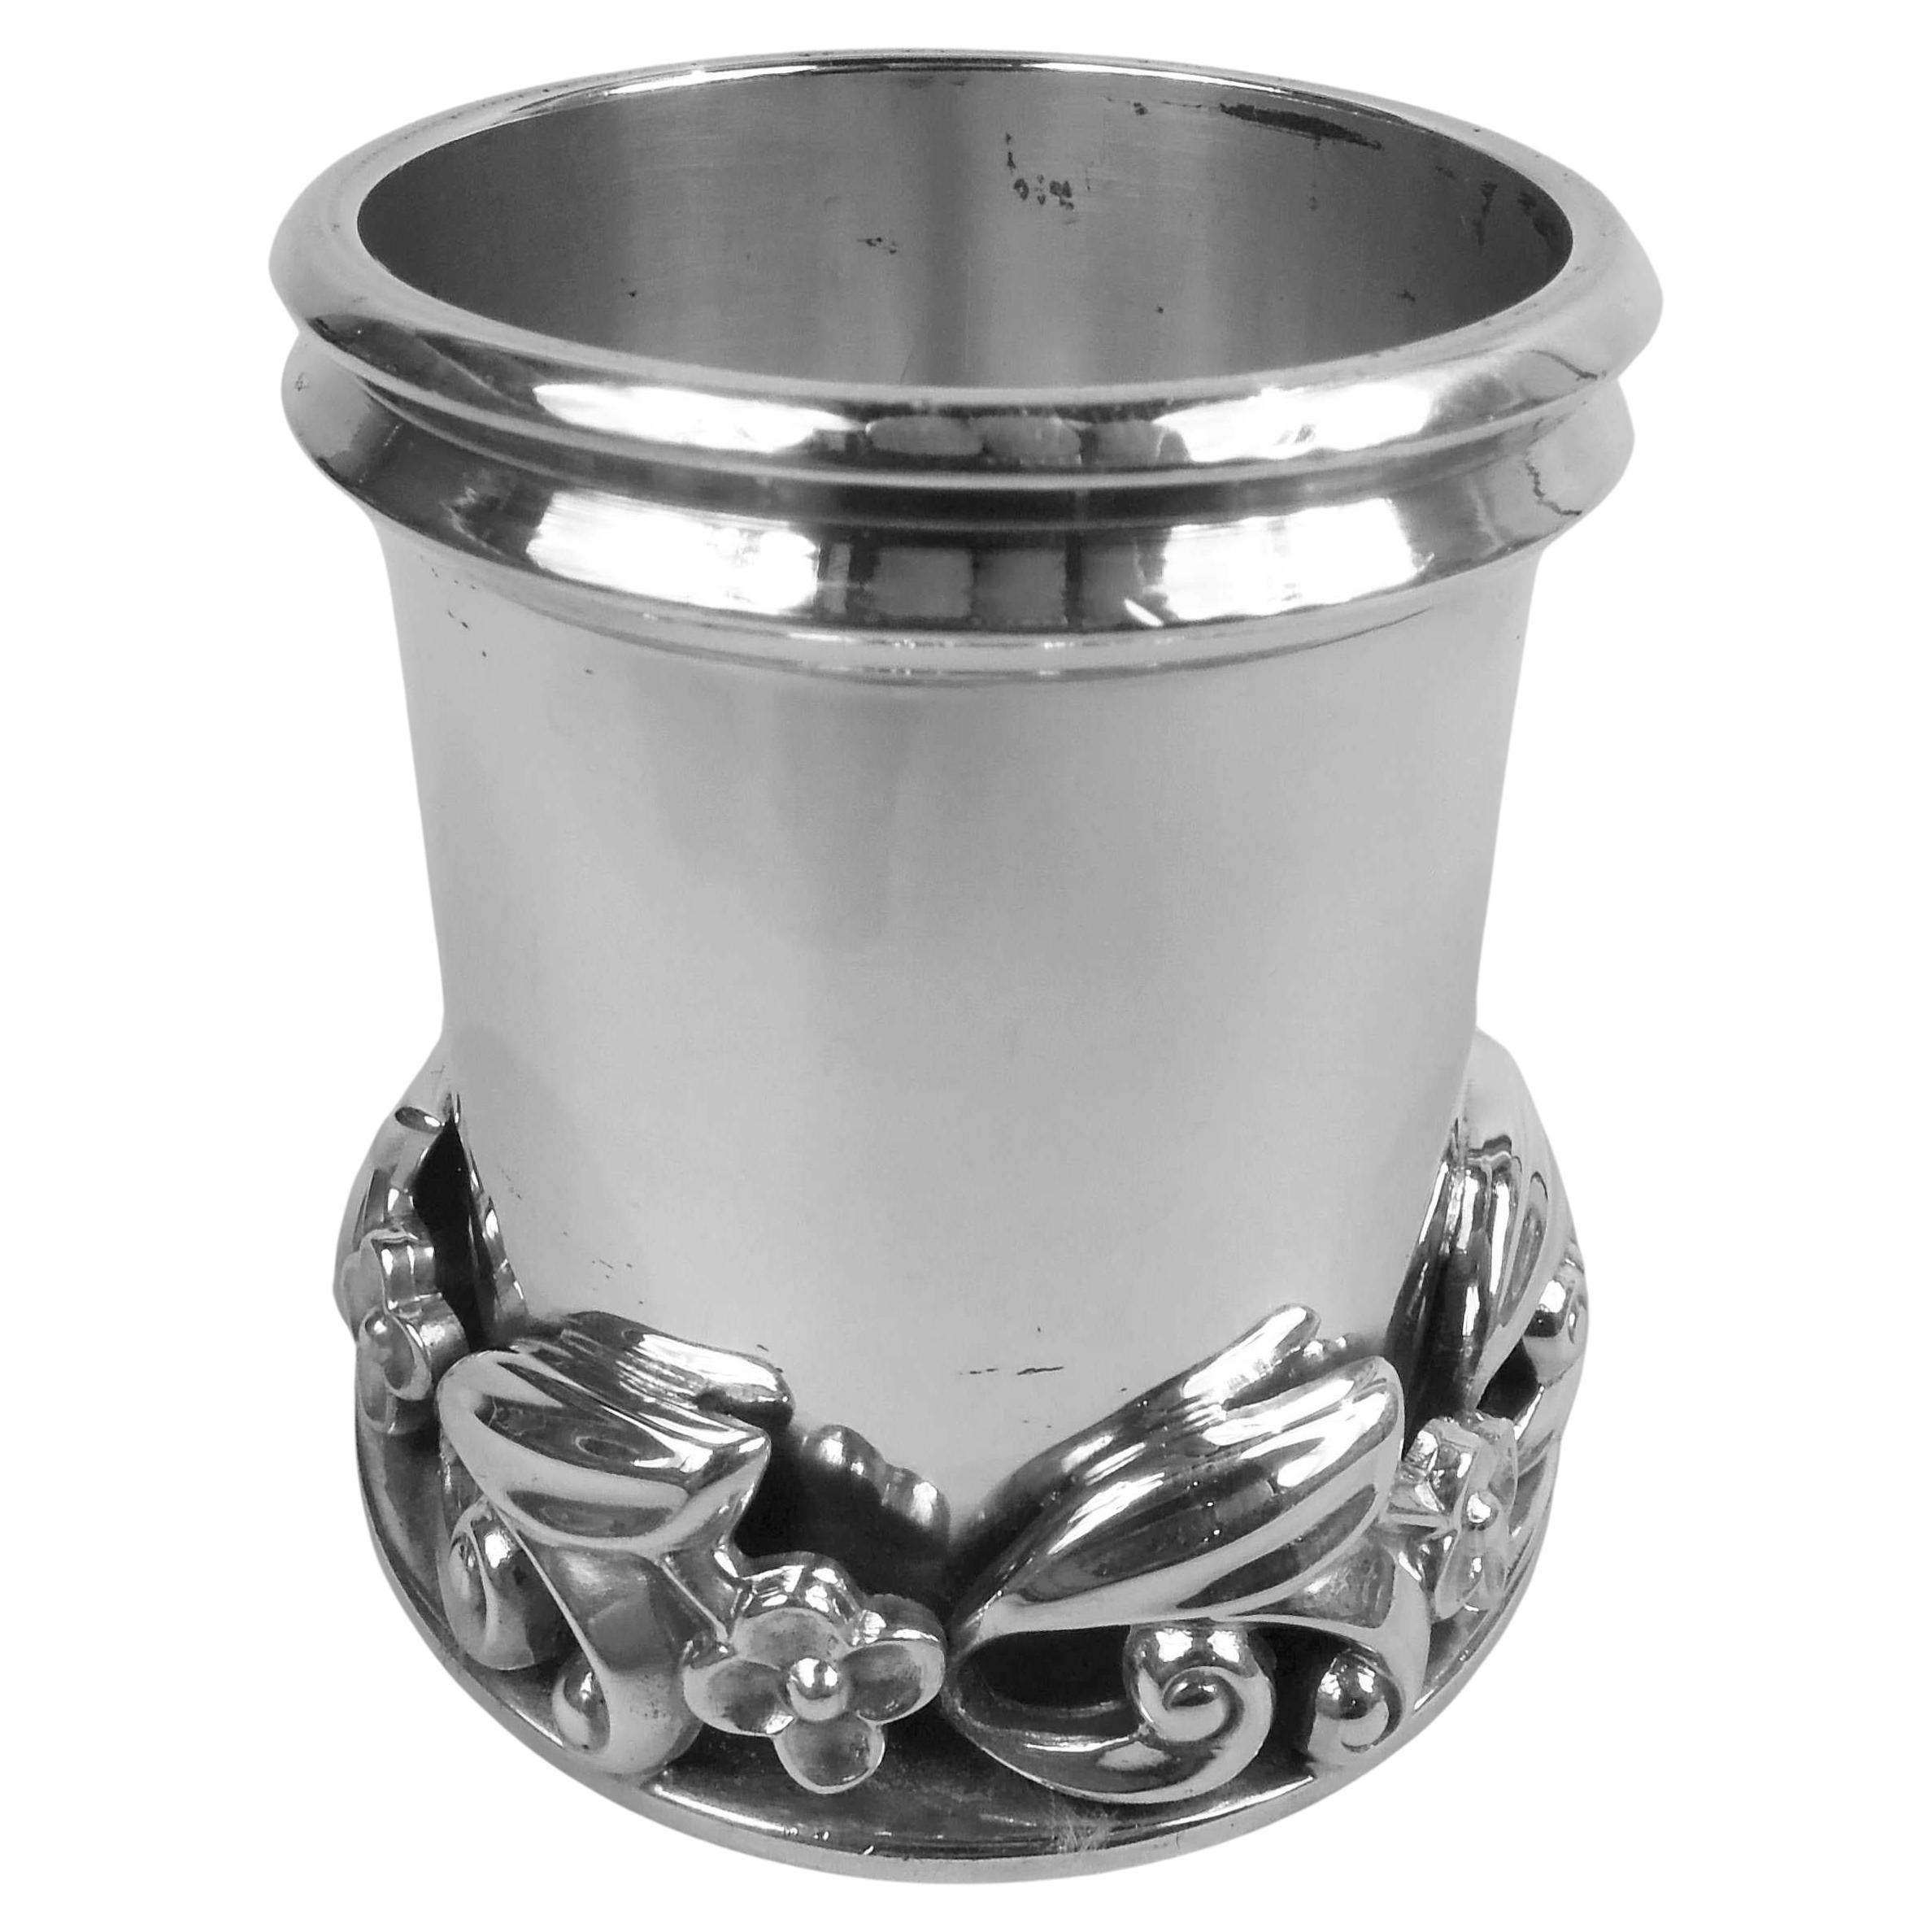 The Paglia Midcentury Modern A Silver Toothpick Holder (Porte cure-dents) en vente